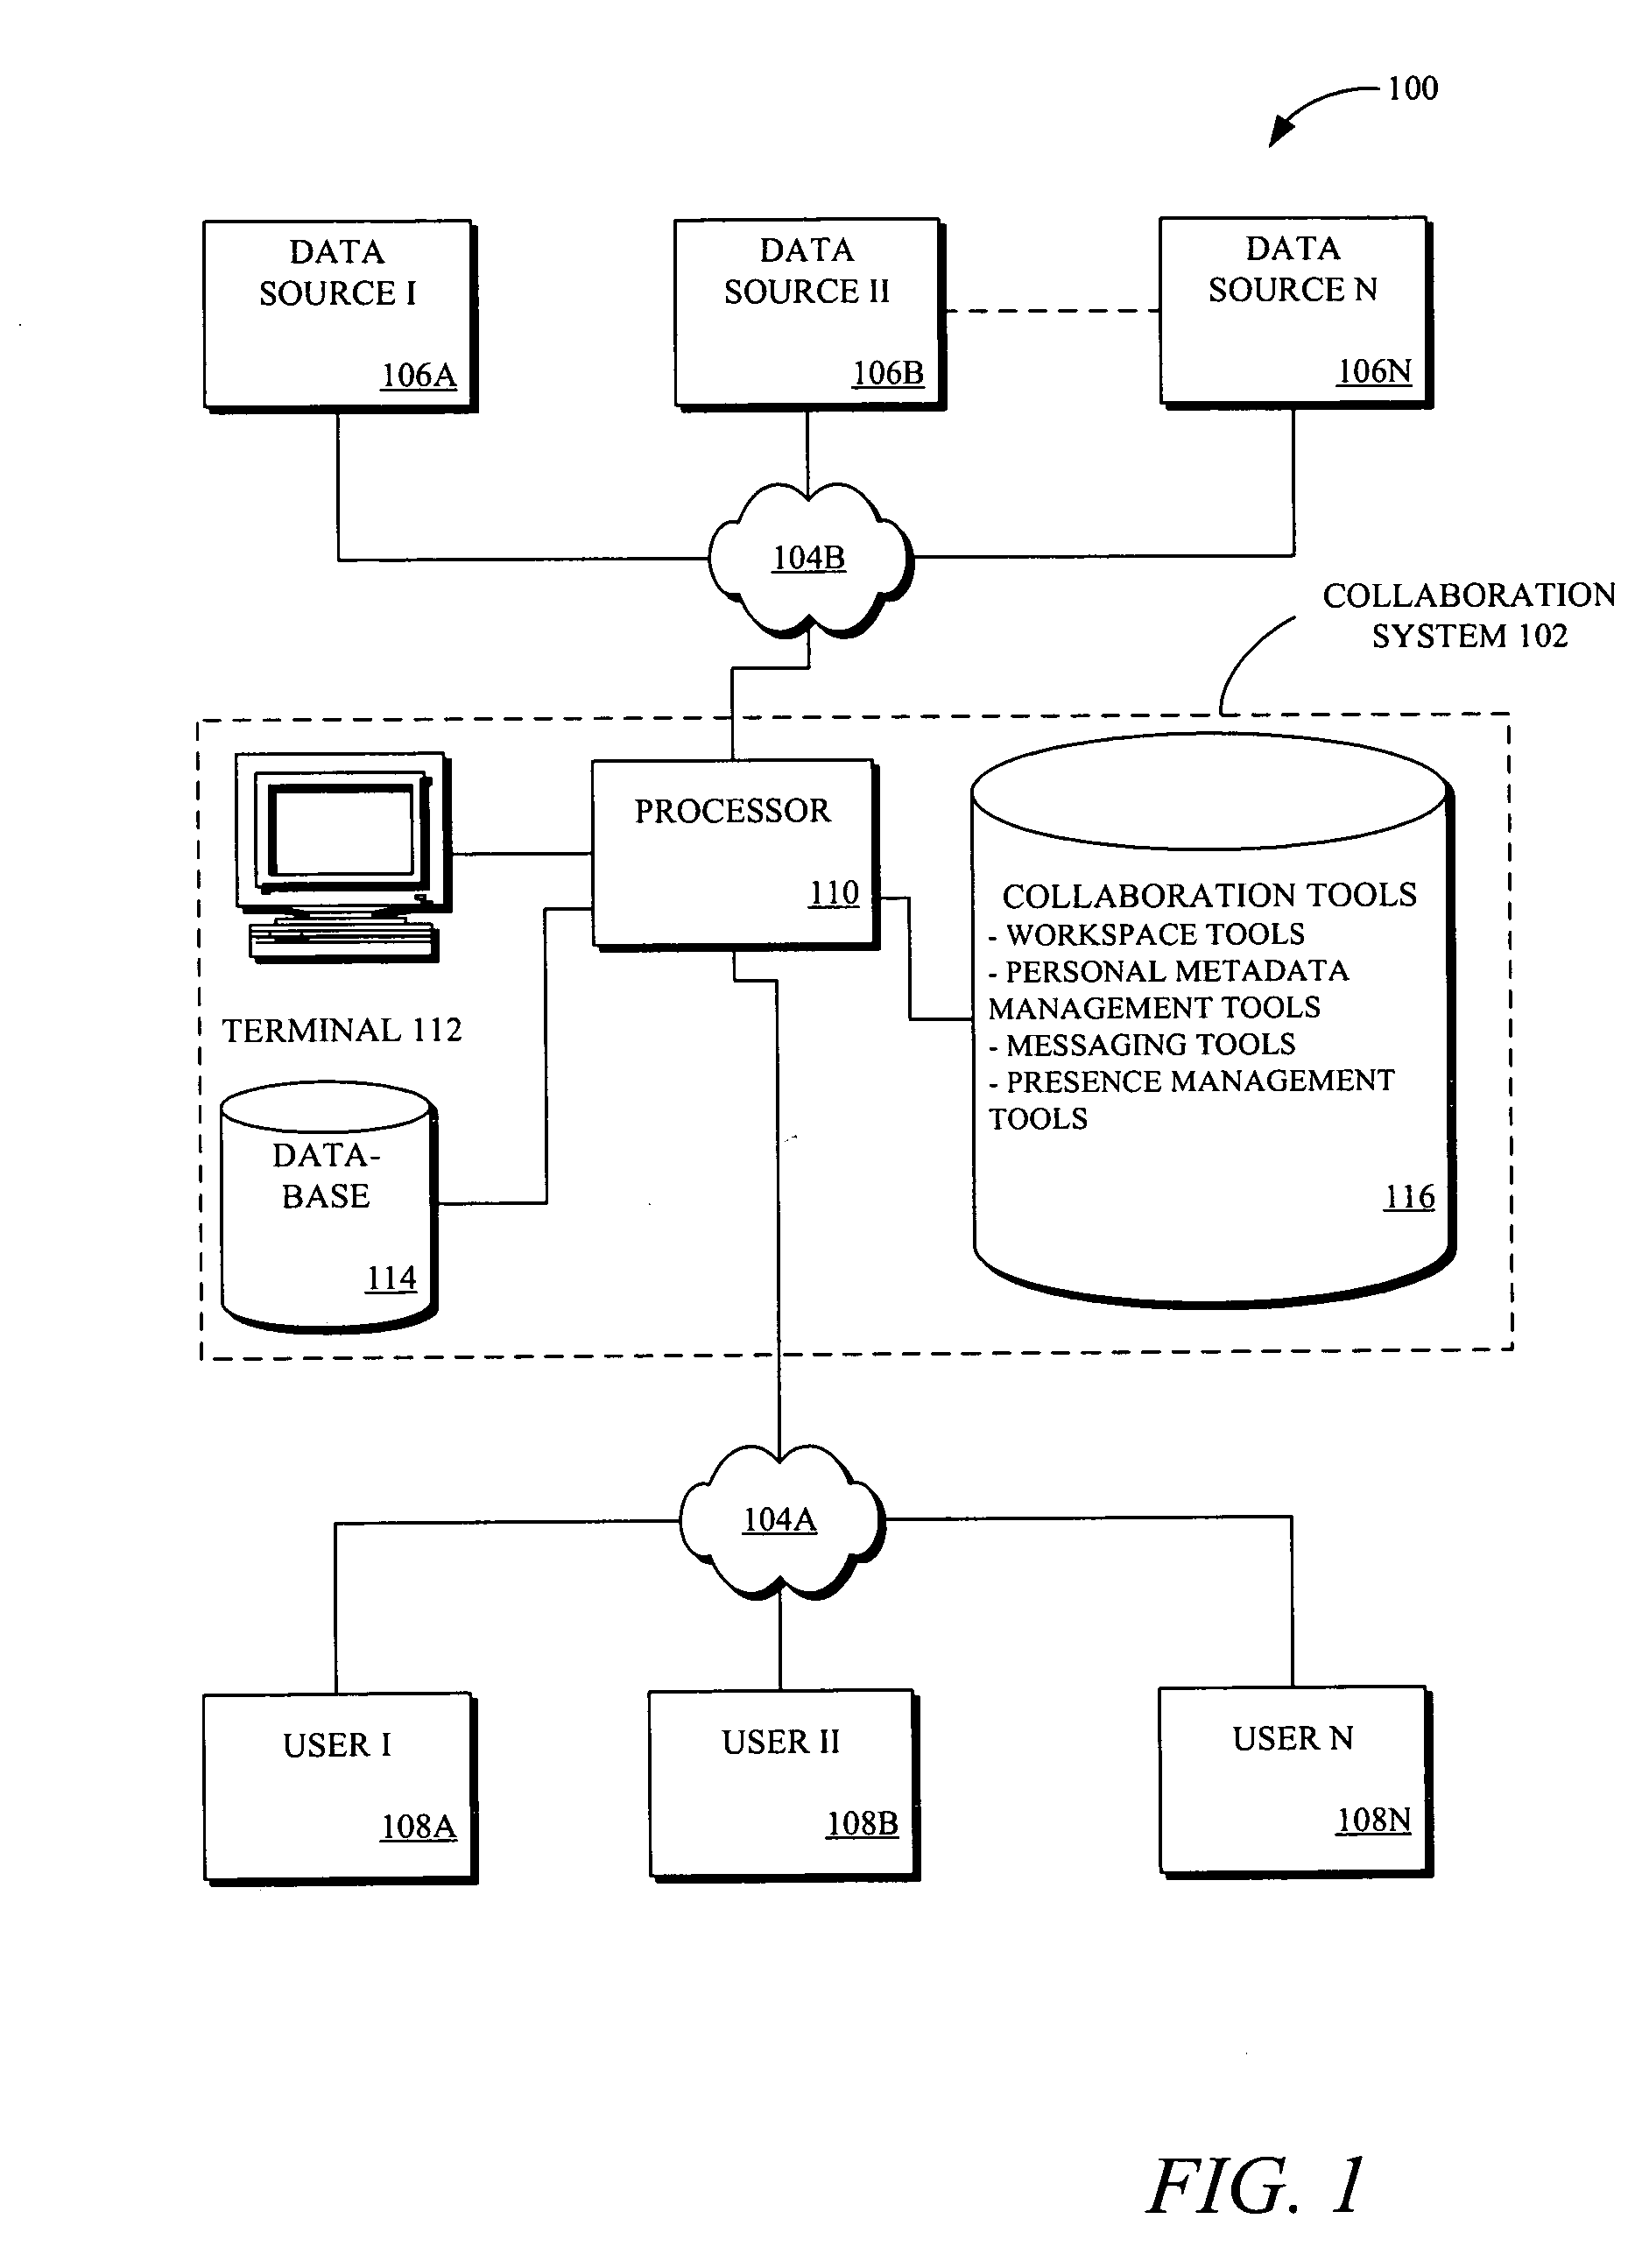 Methods and systems for enabling the collaborative management of information based upon user interest